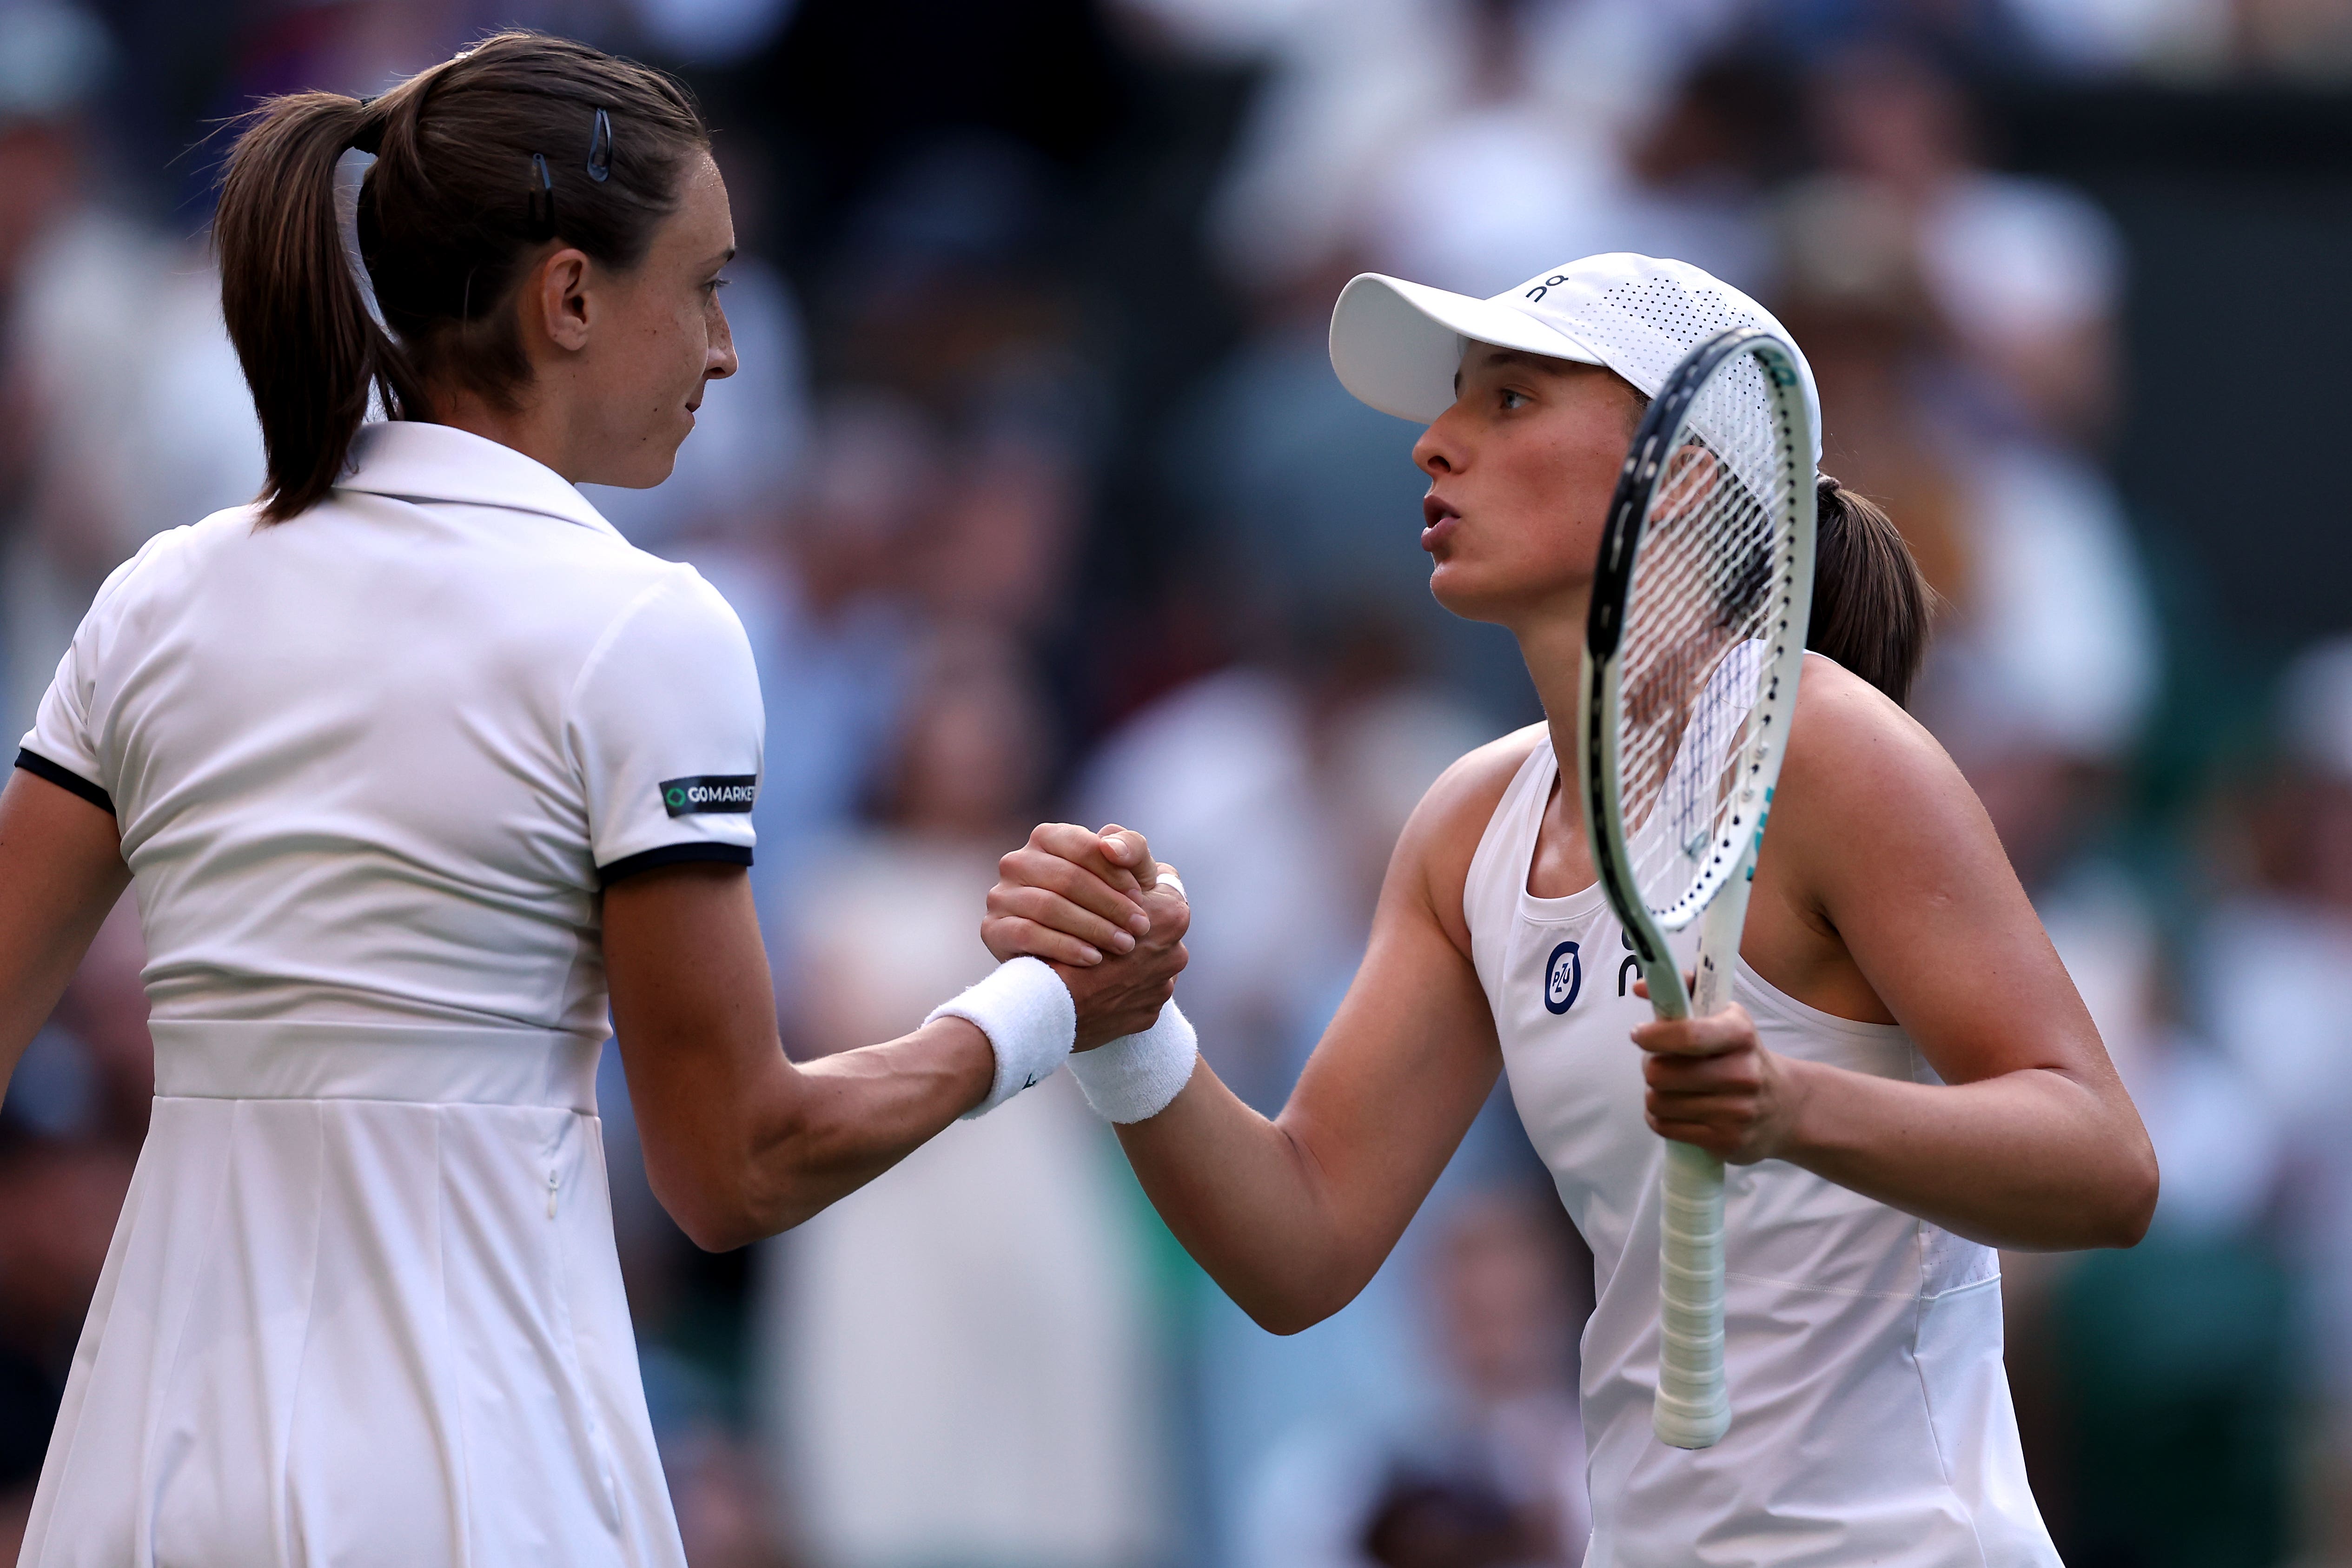 Iga Swiatek matches her best Wimbledon showing with win over Petra Martic The Independent